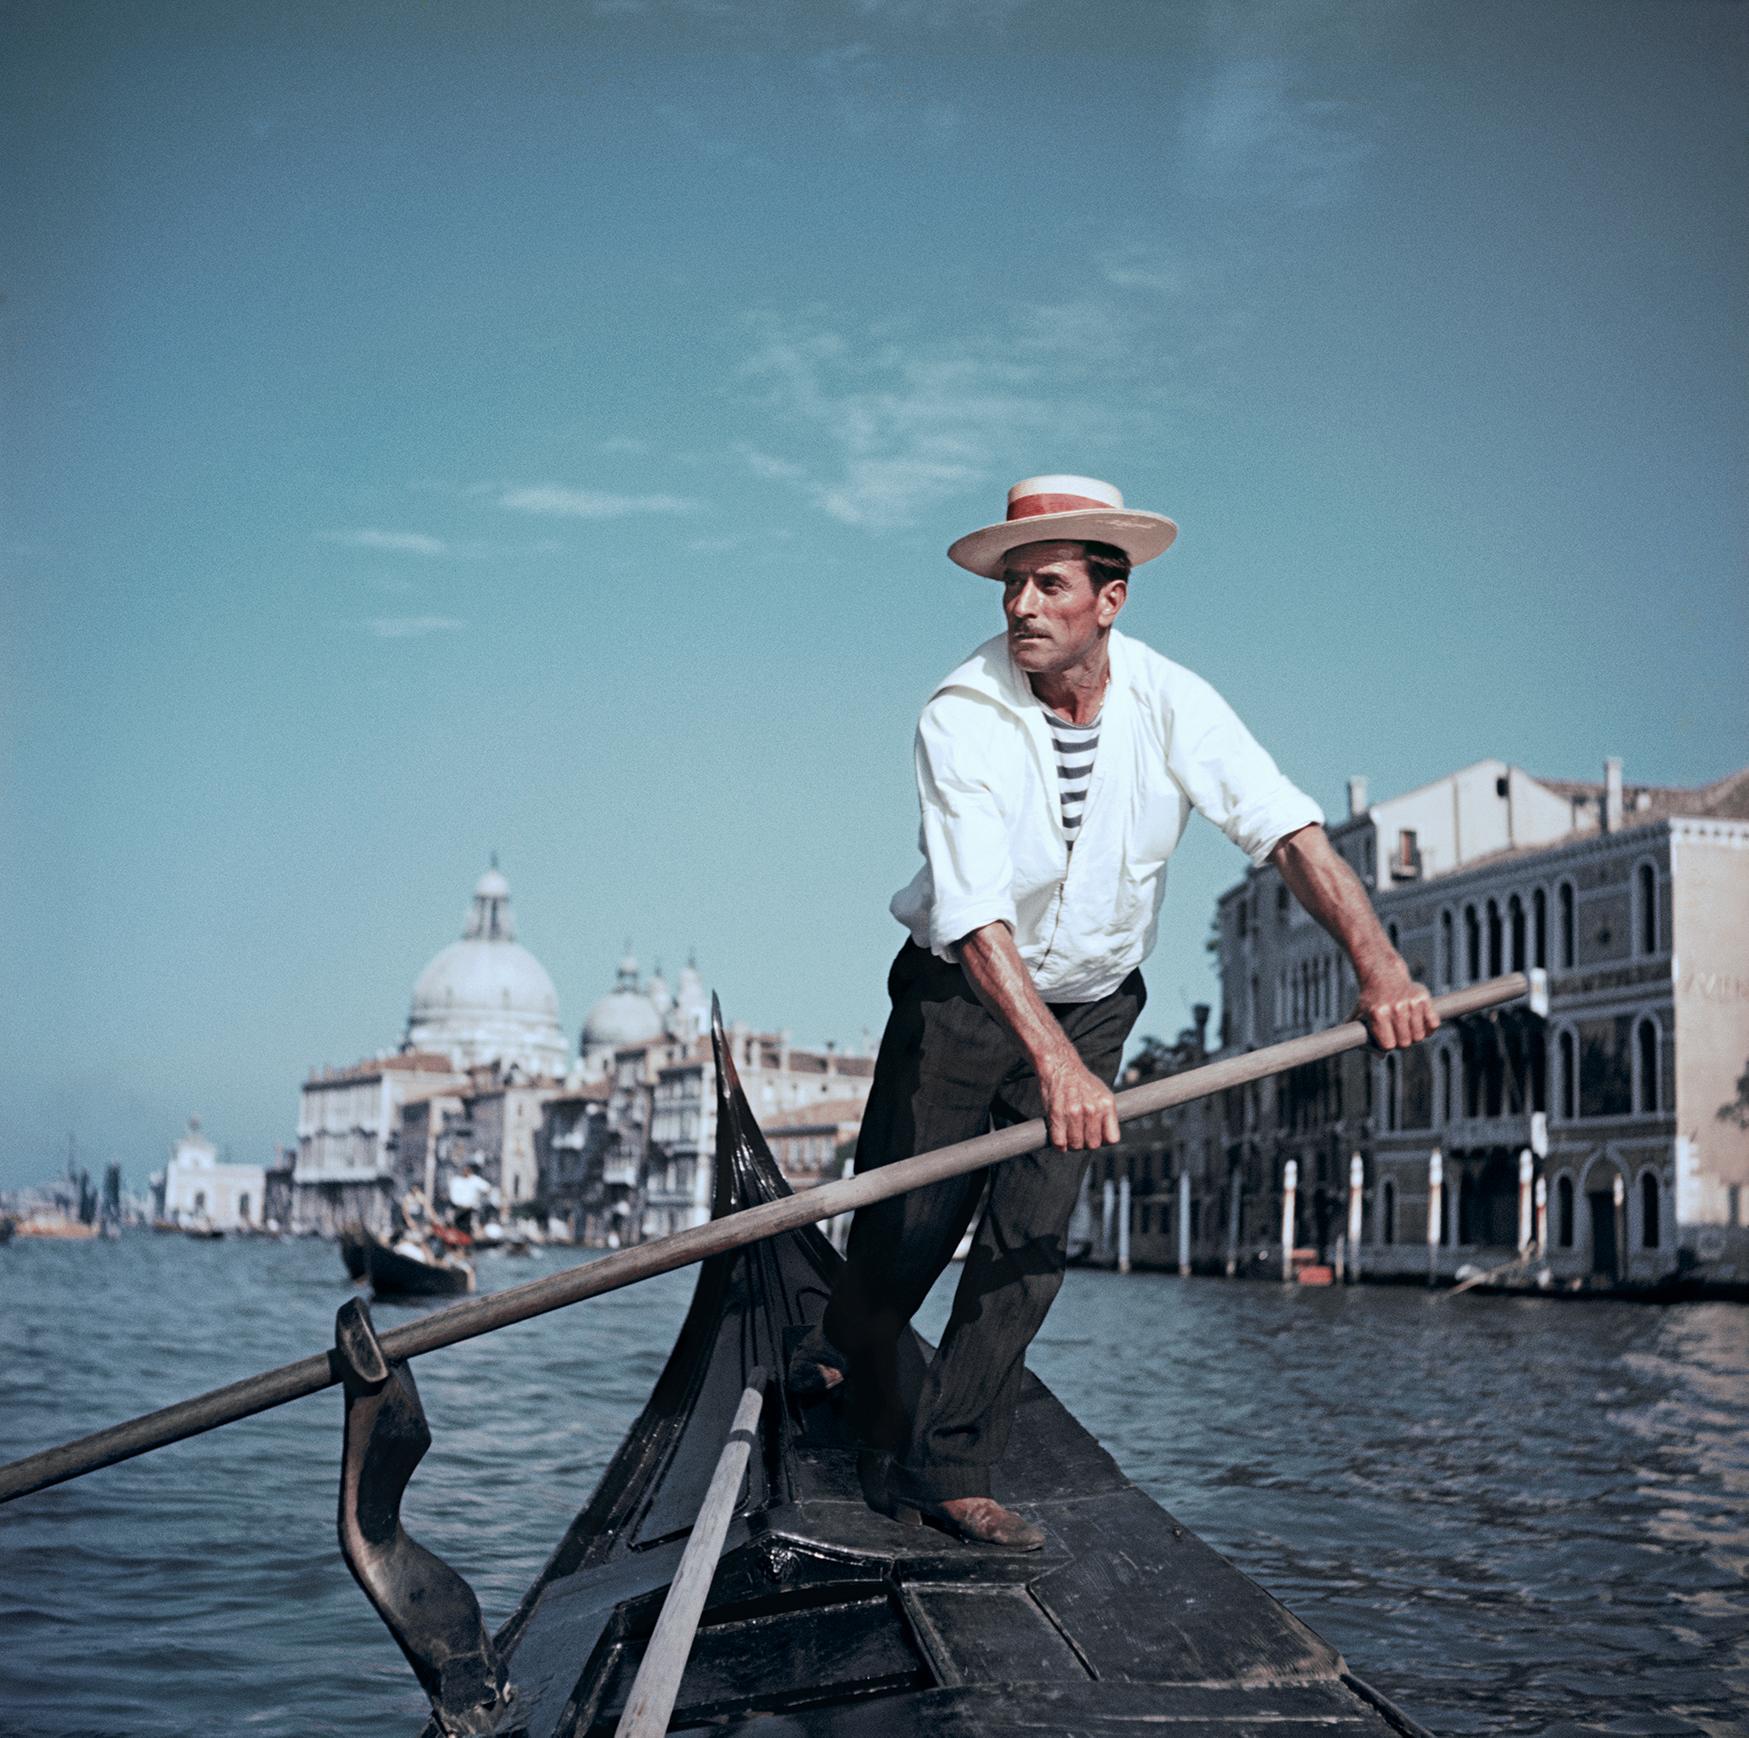 Slim Aarons
Venice Gondolier
1957
C-Print
Signature stamped and hand numbered edition of 150 with certificate of authenticity from the Slim Aarons estate

A gondolier on the Grand Canal in Venice, 1957.

Slim Aarons, an acclaimed fine art